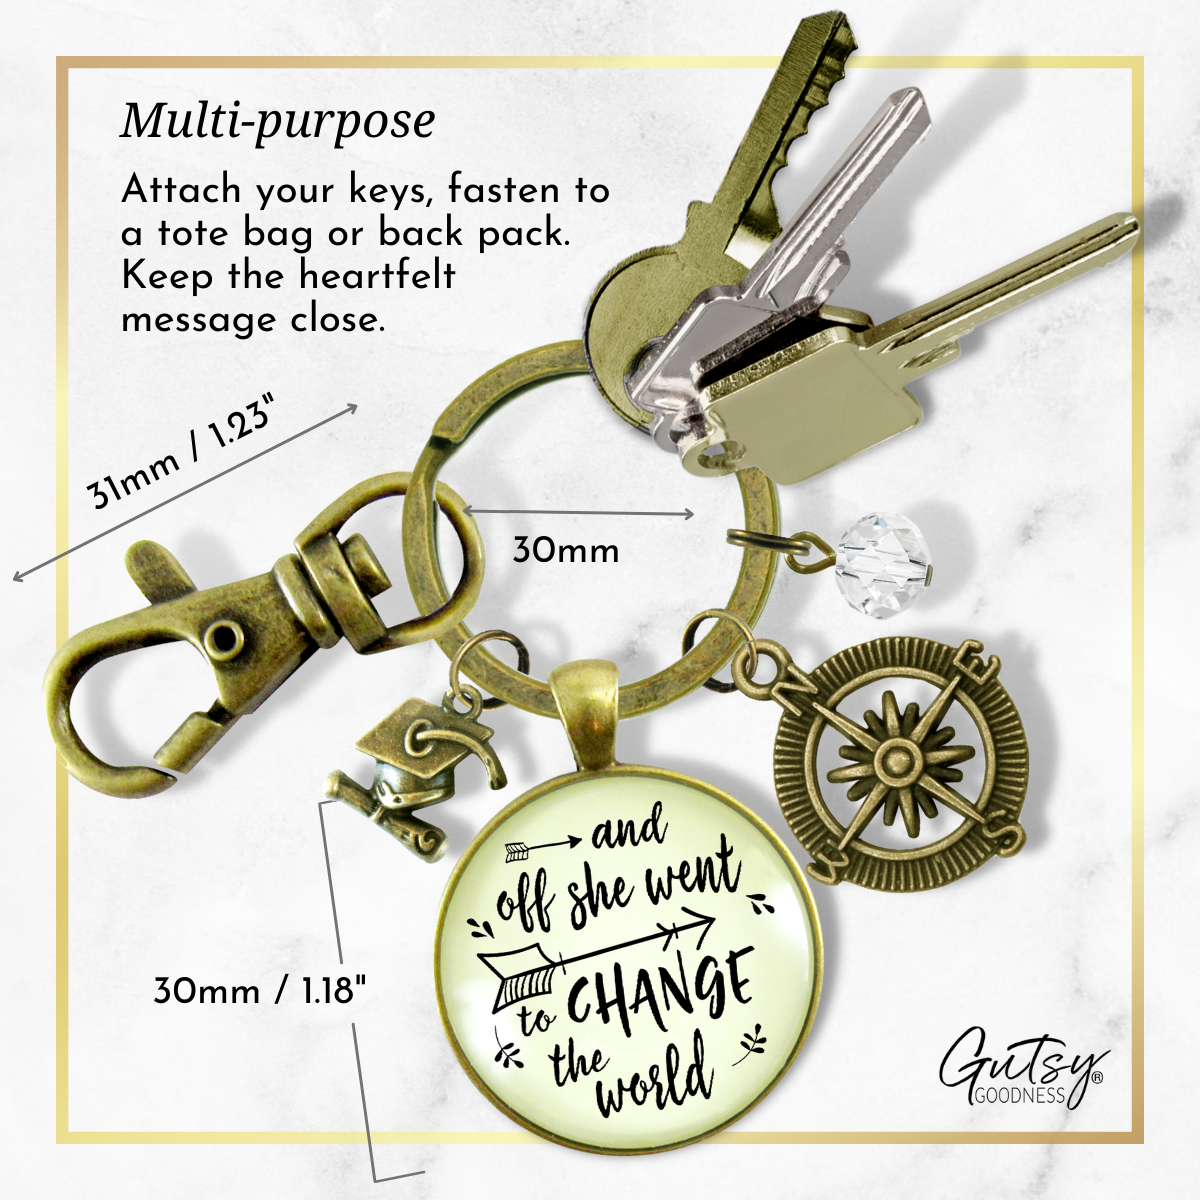 And Off She Went to Change the World Graduation Keychain Compass Charm Womens Jewelry - Gutsy Goodness Handmade Jewelry;And Off She Went To Change The World Graduation Keychain Compass Charm Womens Jewelry - Gutsy Goodness Handmade Jewelry Gifts